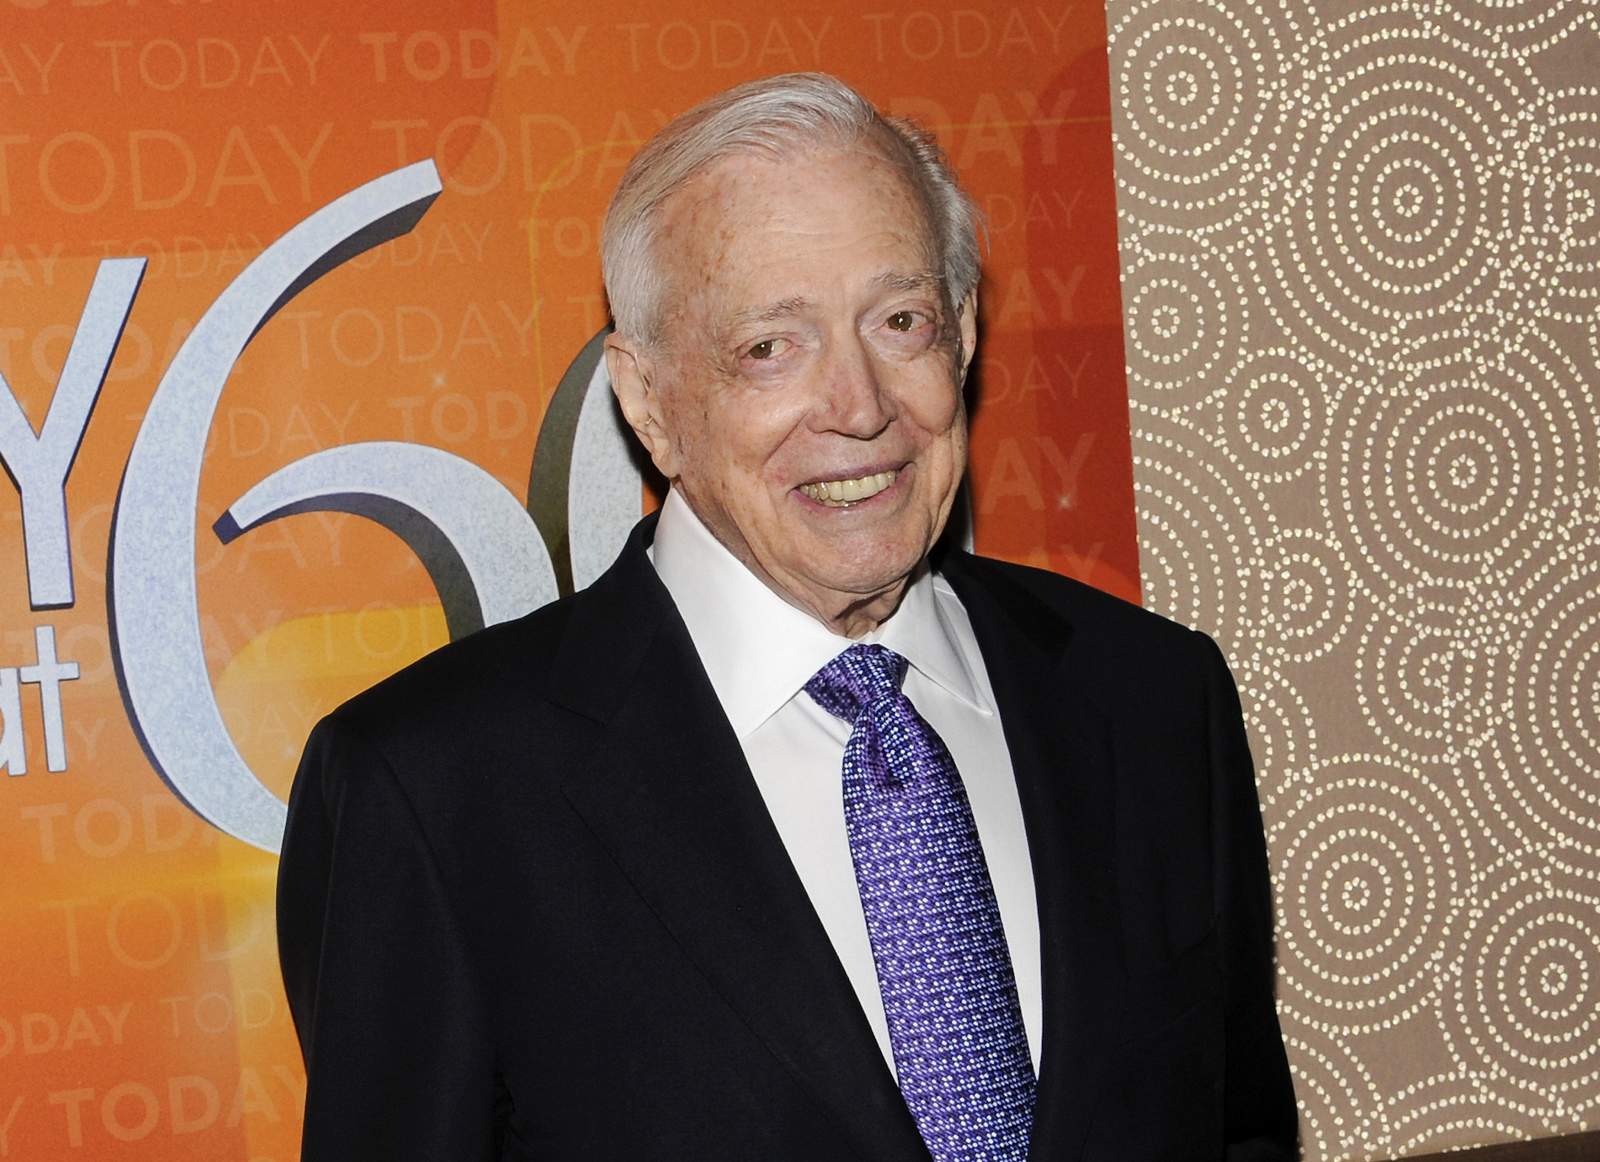 Hugh Downs, genial presence on TV news and game shows, dies